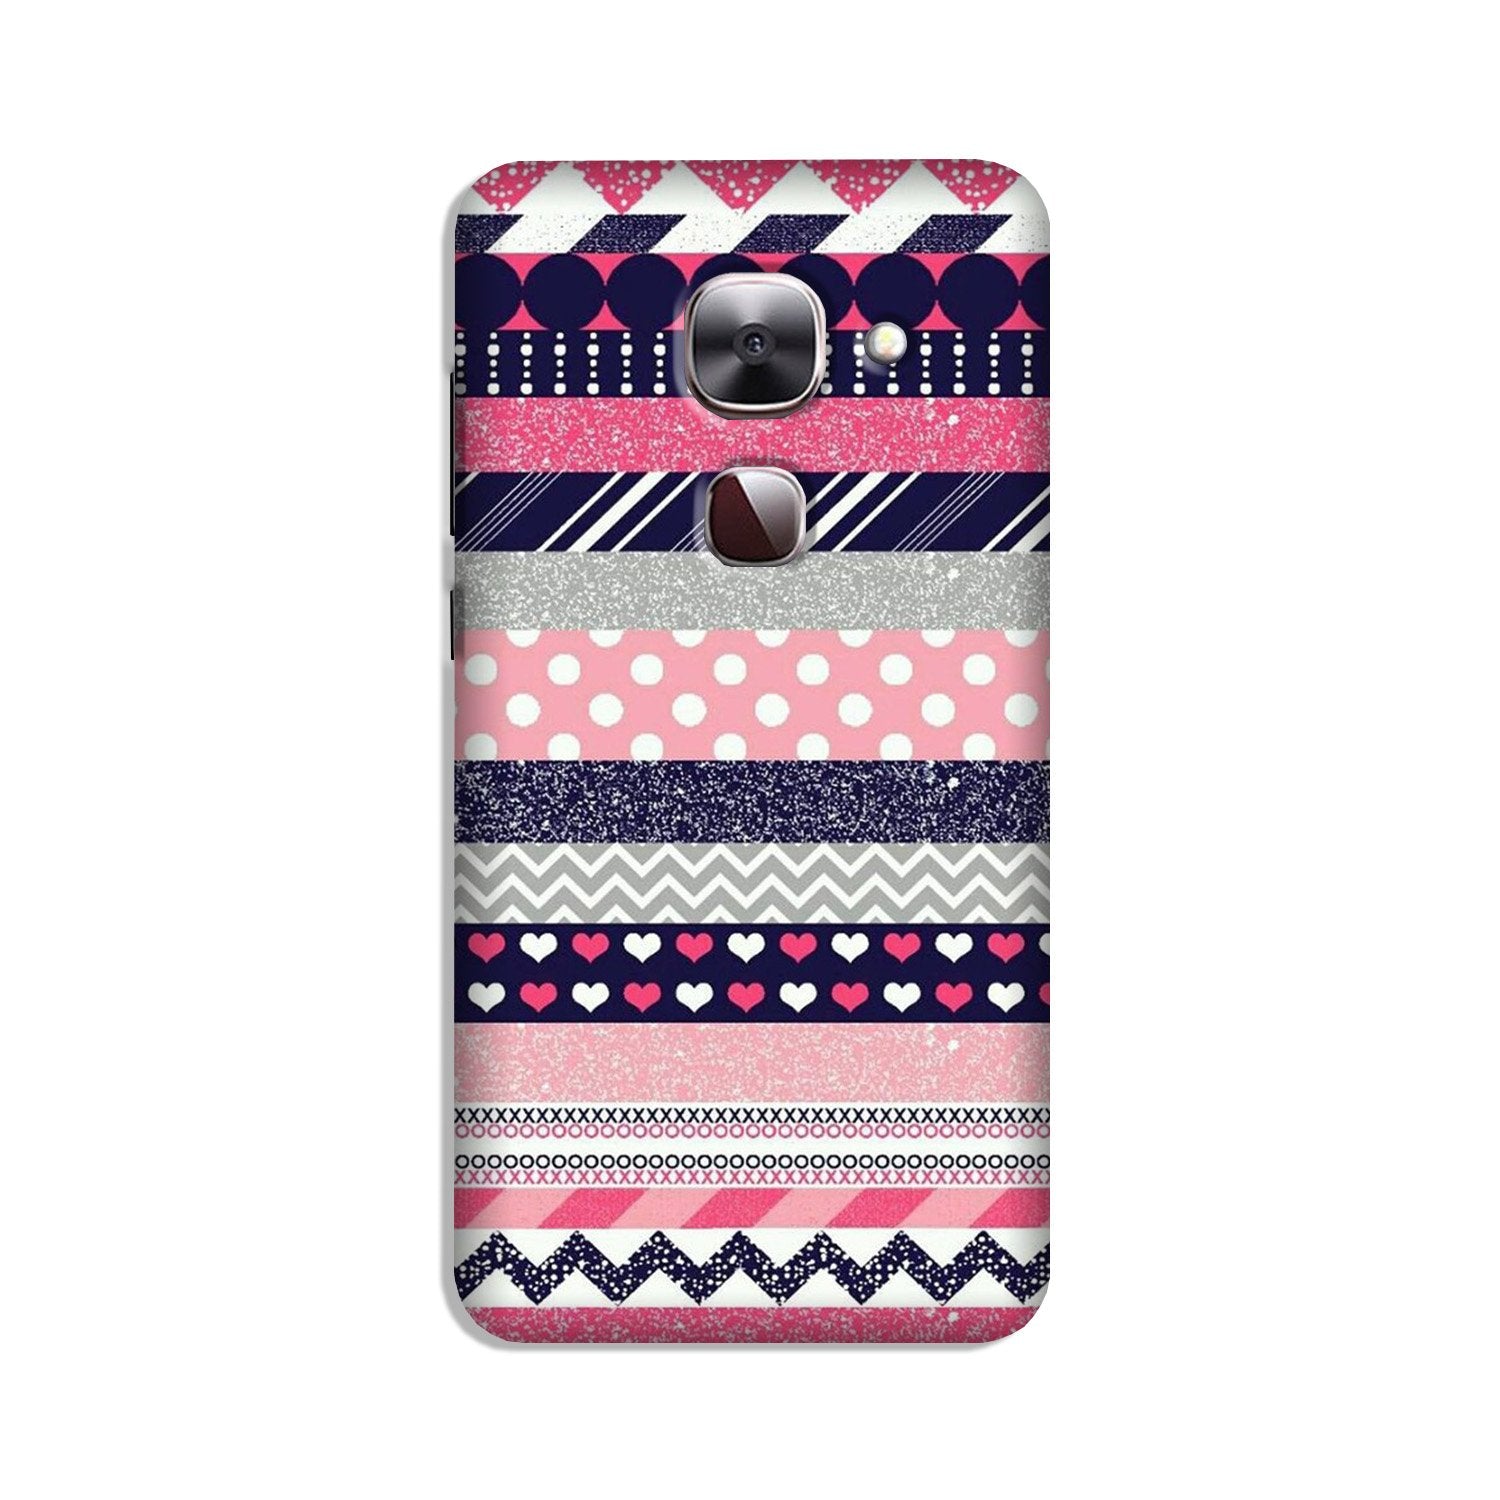 Pattern Case for LeEco le 2s